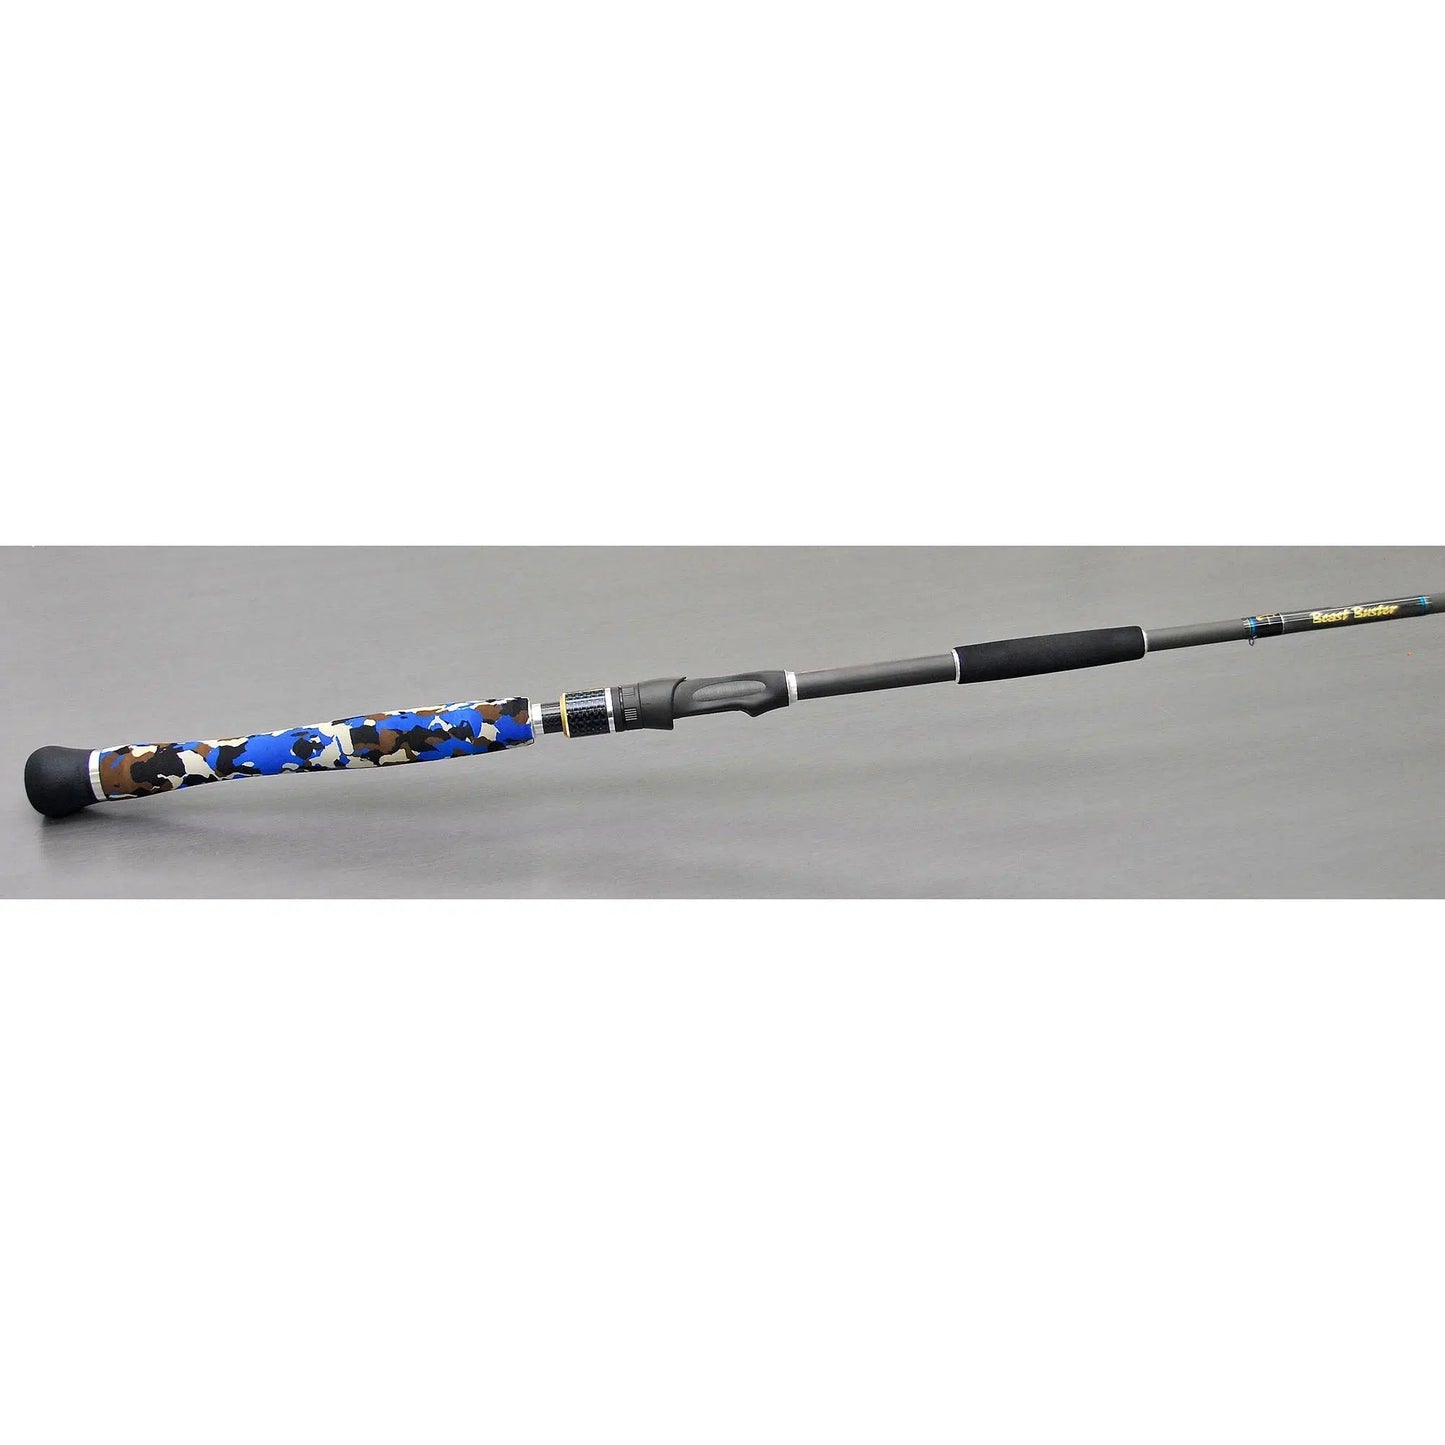 Millerods Production Rod-Rod-Millerods-Spin-Beast Buster LMLC 762-Fishing Station